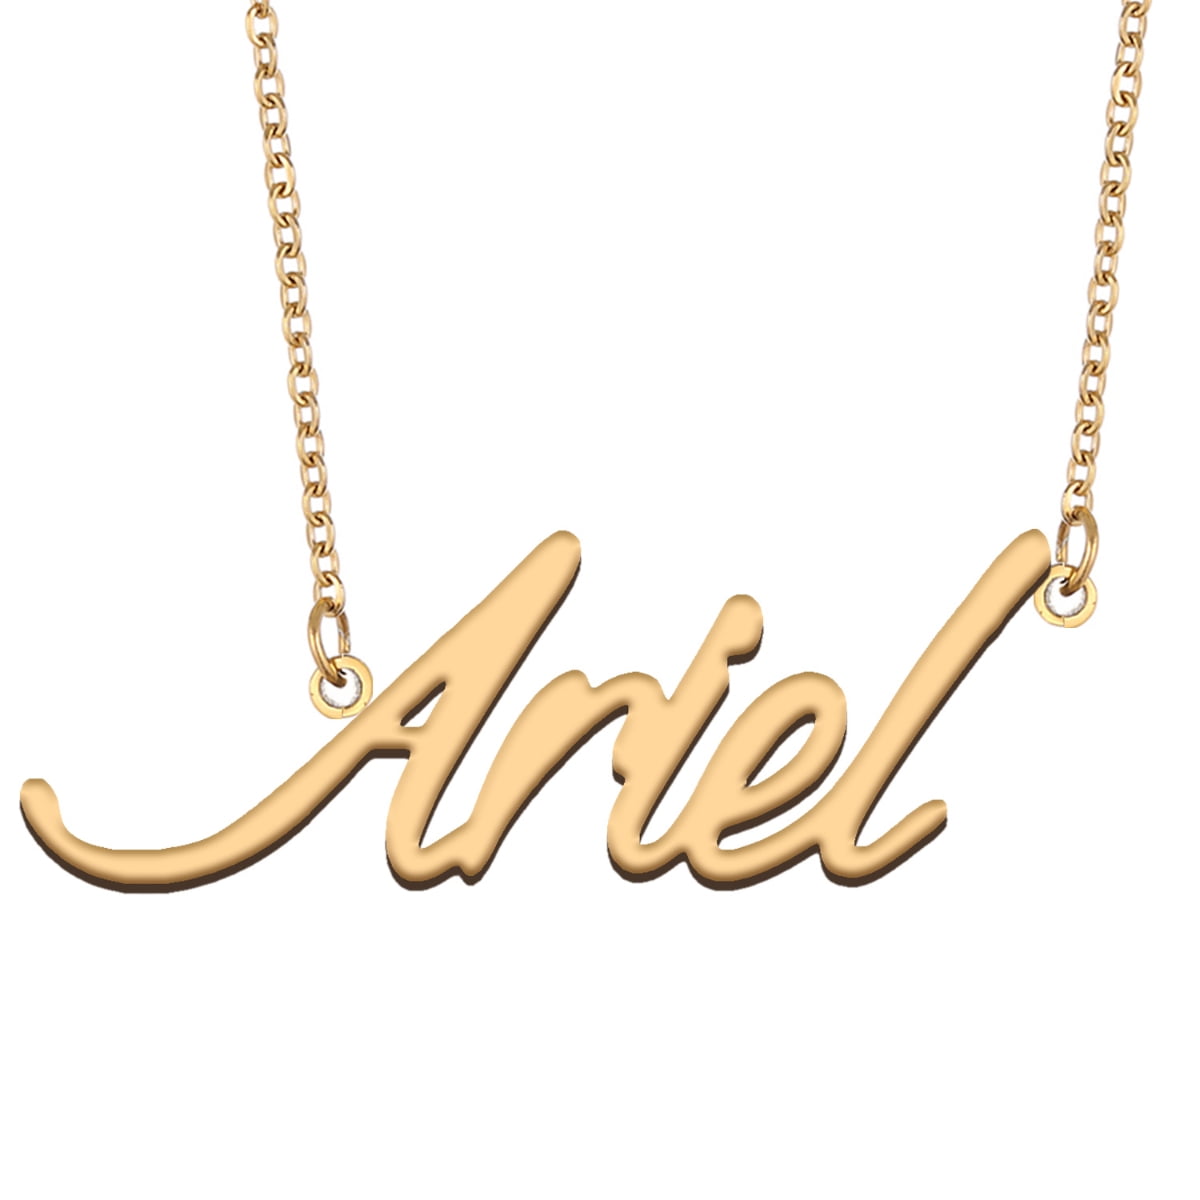 Stainless Steel Silver Gold Black Rose Gold Color Baby Name Ivie Engraved Personalized Gifts For Son Daughter Boyfriend Girlfriend Initial Customizable Pendant Necklace Dog Tags 24 Ball Chain